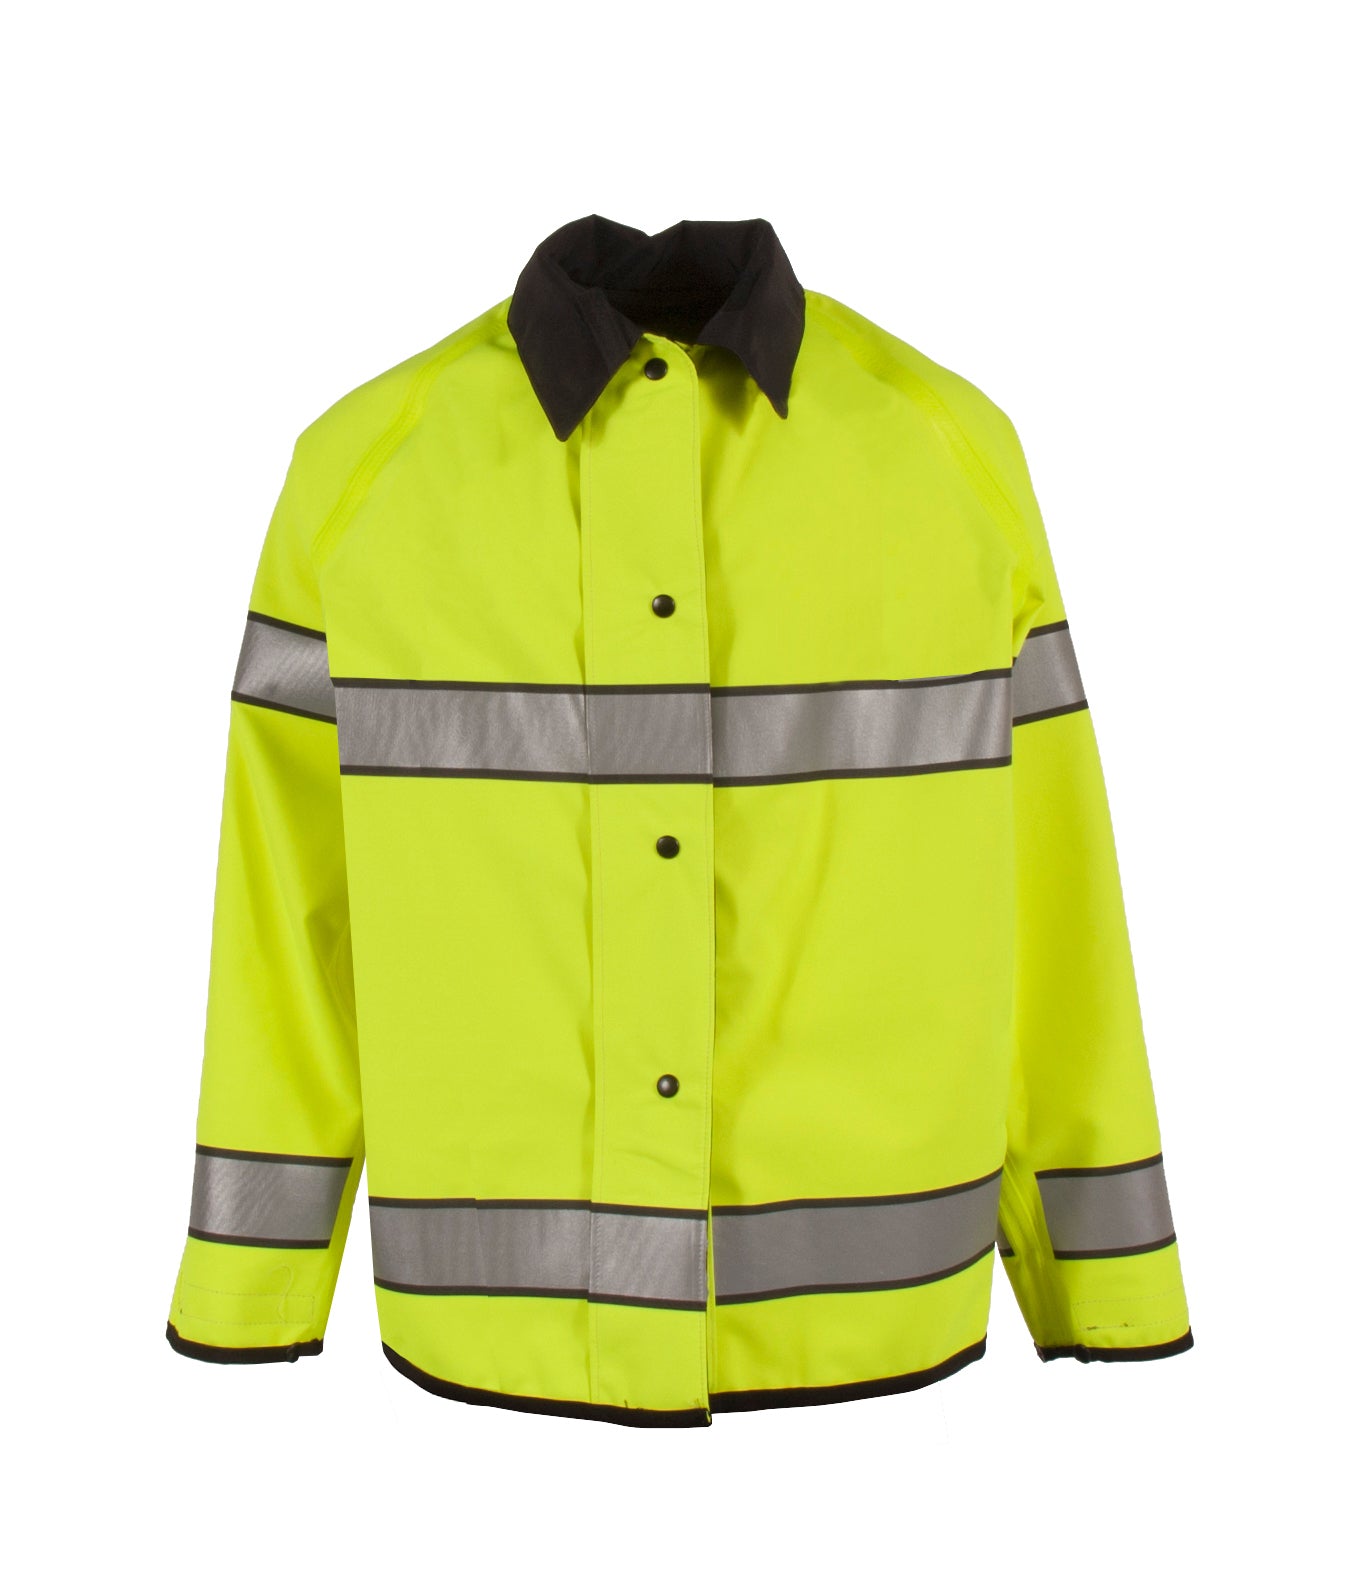 Neese 5010 Series Reversible Police Jacket with 3M Reflective Taping